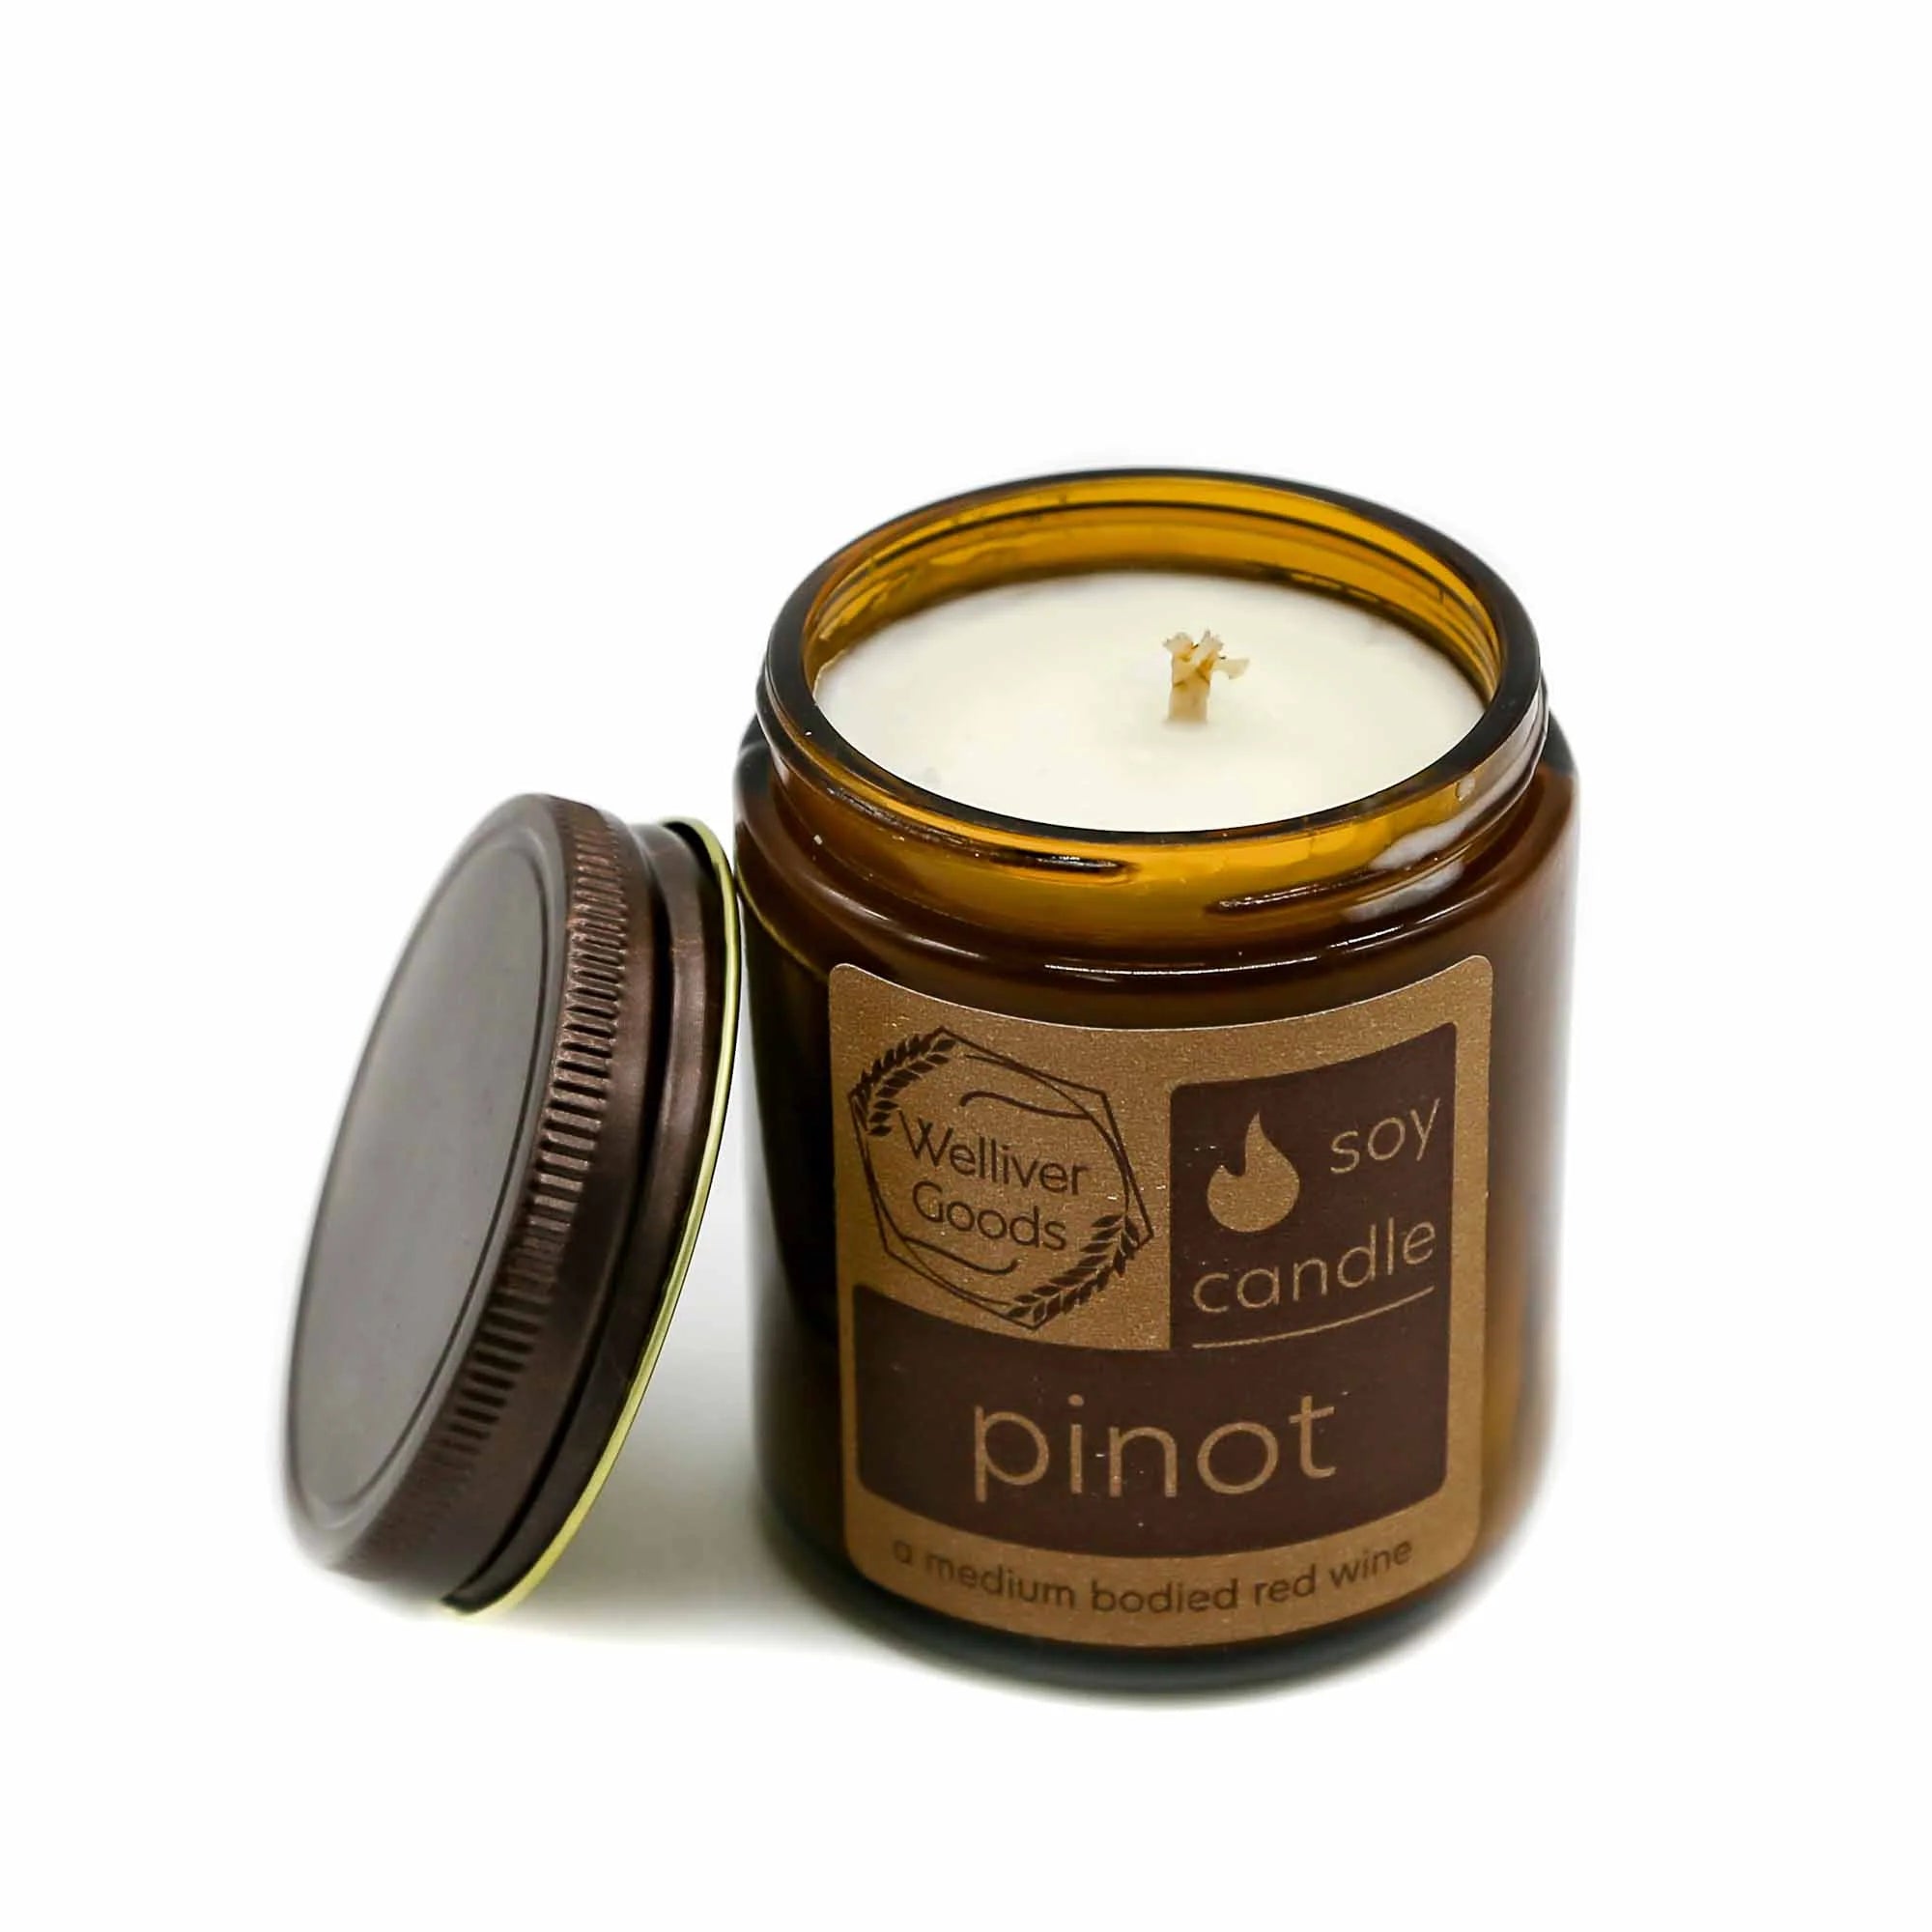 welliver goods candle - pinot - Mortise And Tenon